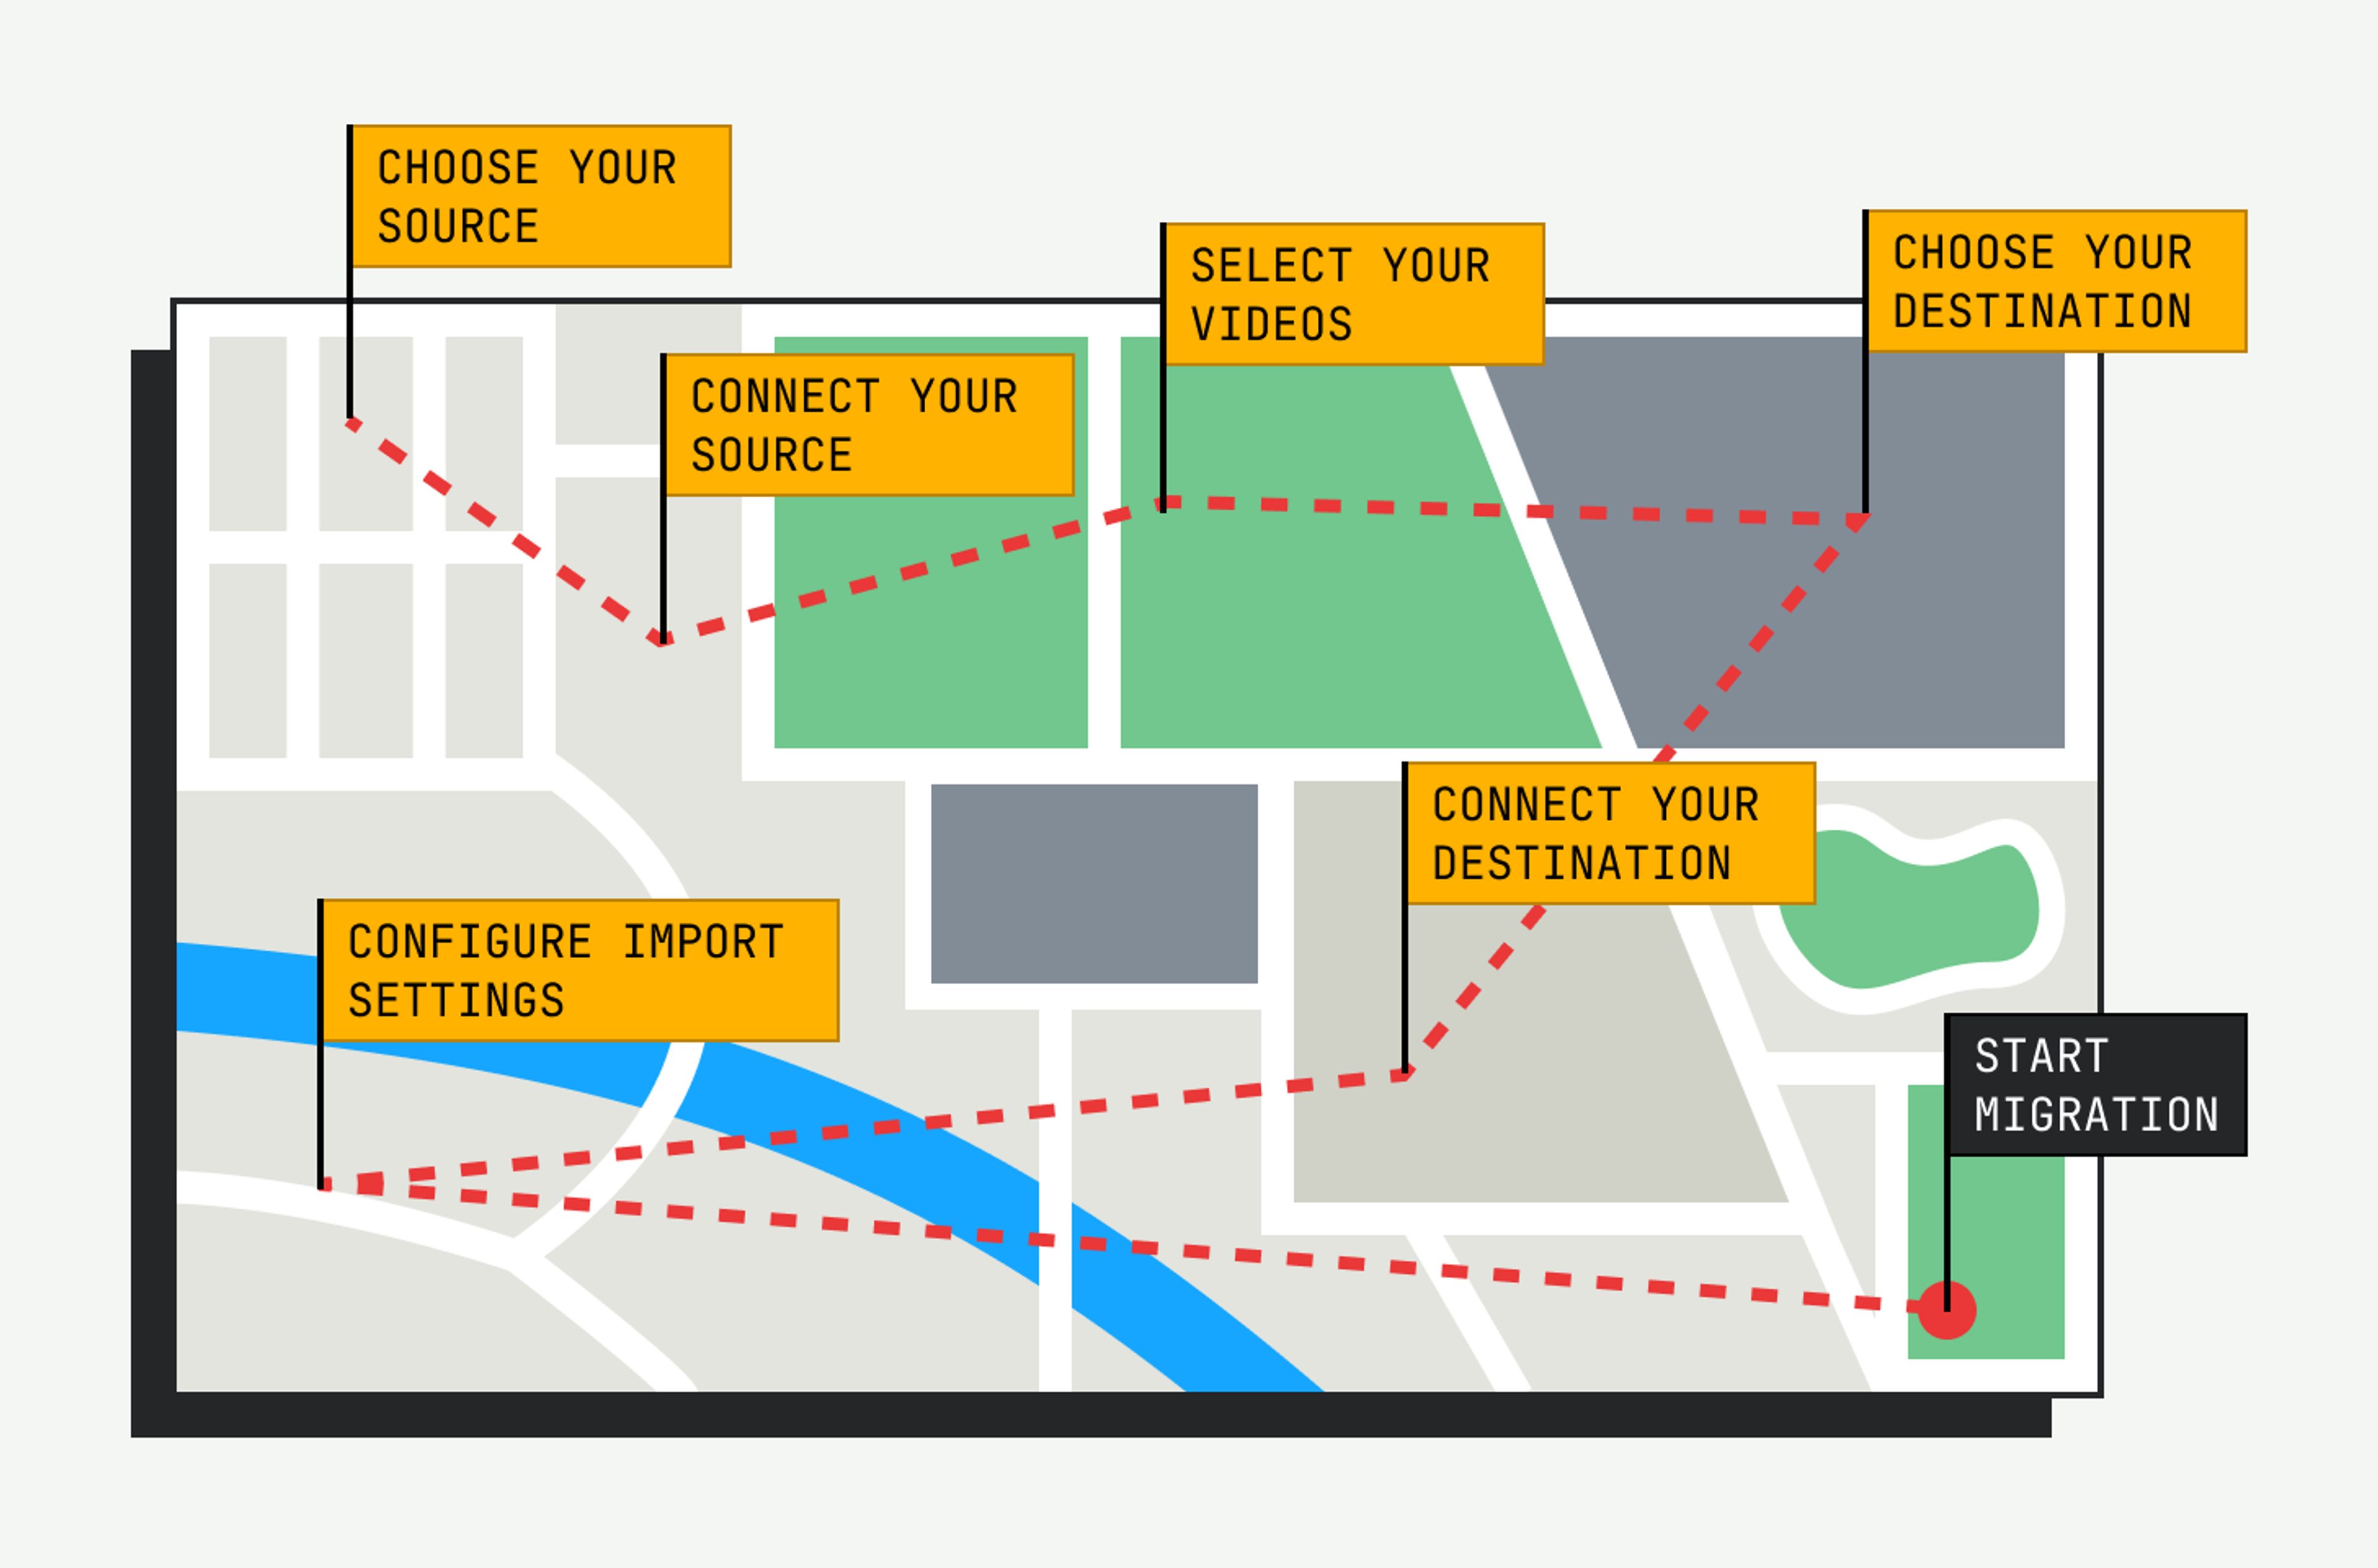 This image depicts a stylized, map-like infographic illustrating a process flow for video migration. It includes labeled steps such as "Choose Your Source," "Connect Your Source," "Select Your Videos," "Choose Your Destination," "Connect Your Destination," and "Start Migration." The steps are connected by dashed red lines on a background that resembles a city map with various colored areas and roads.